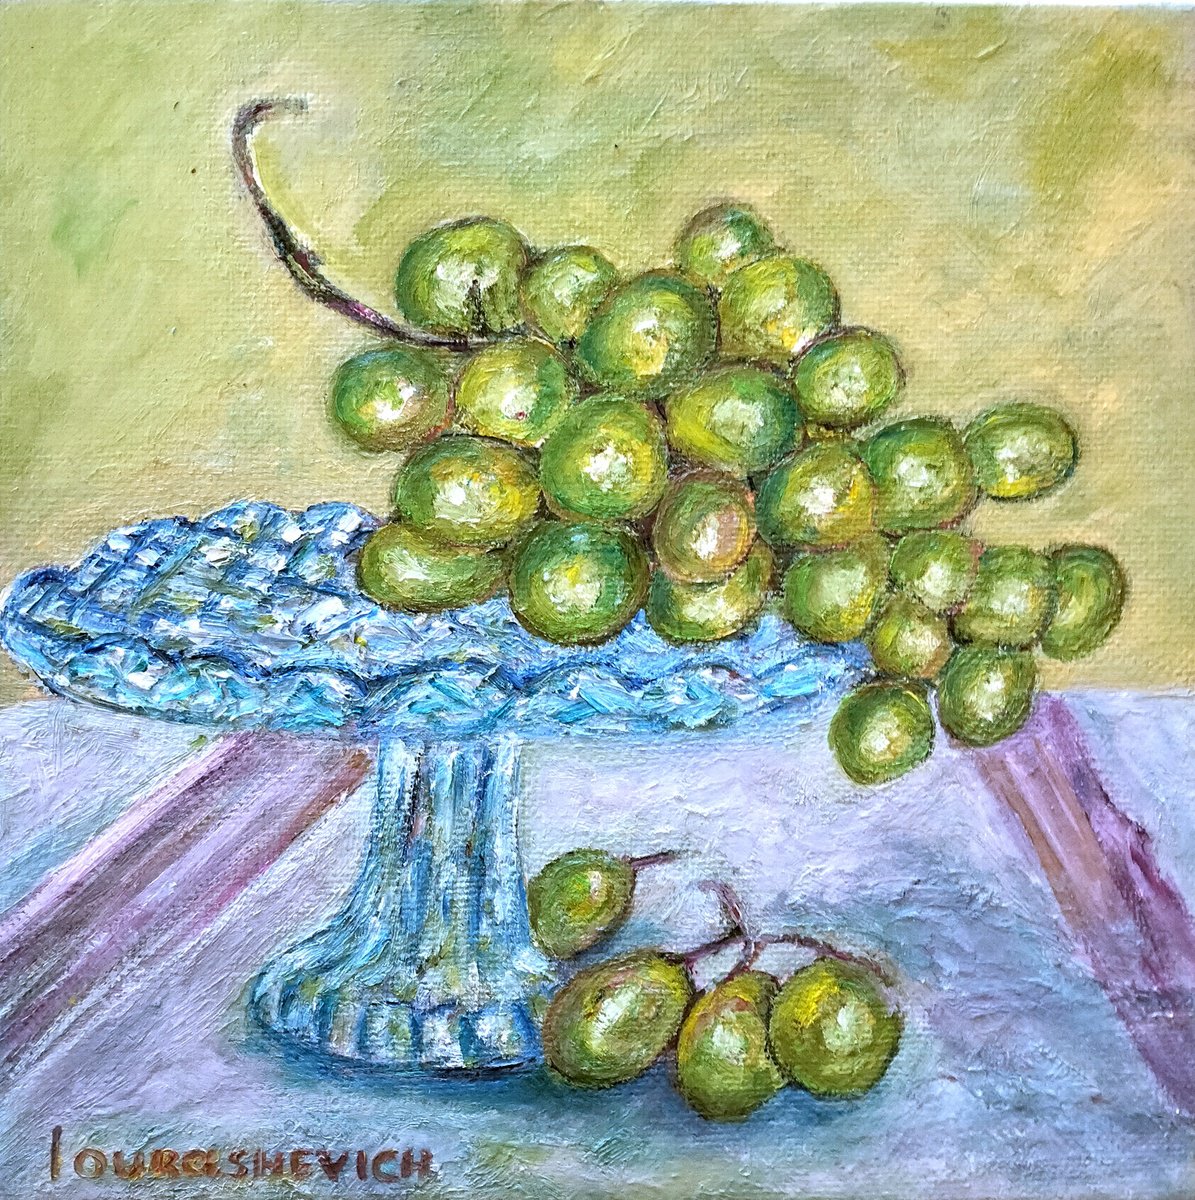 Still Life with Green Grapes Original Oil on Canvas Board Painting 20x20cm/8x8 in by Katia Ricci